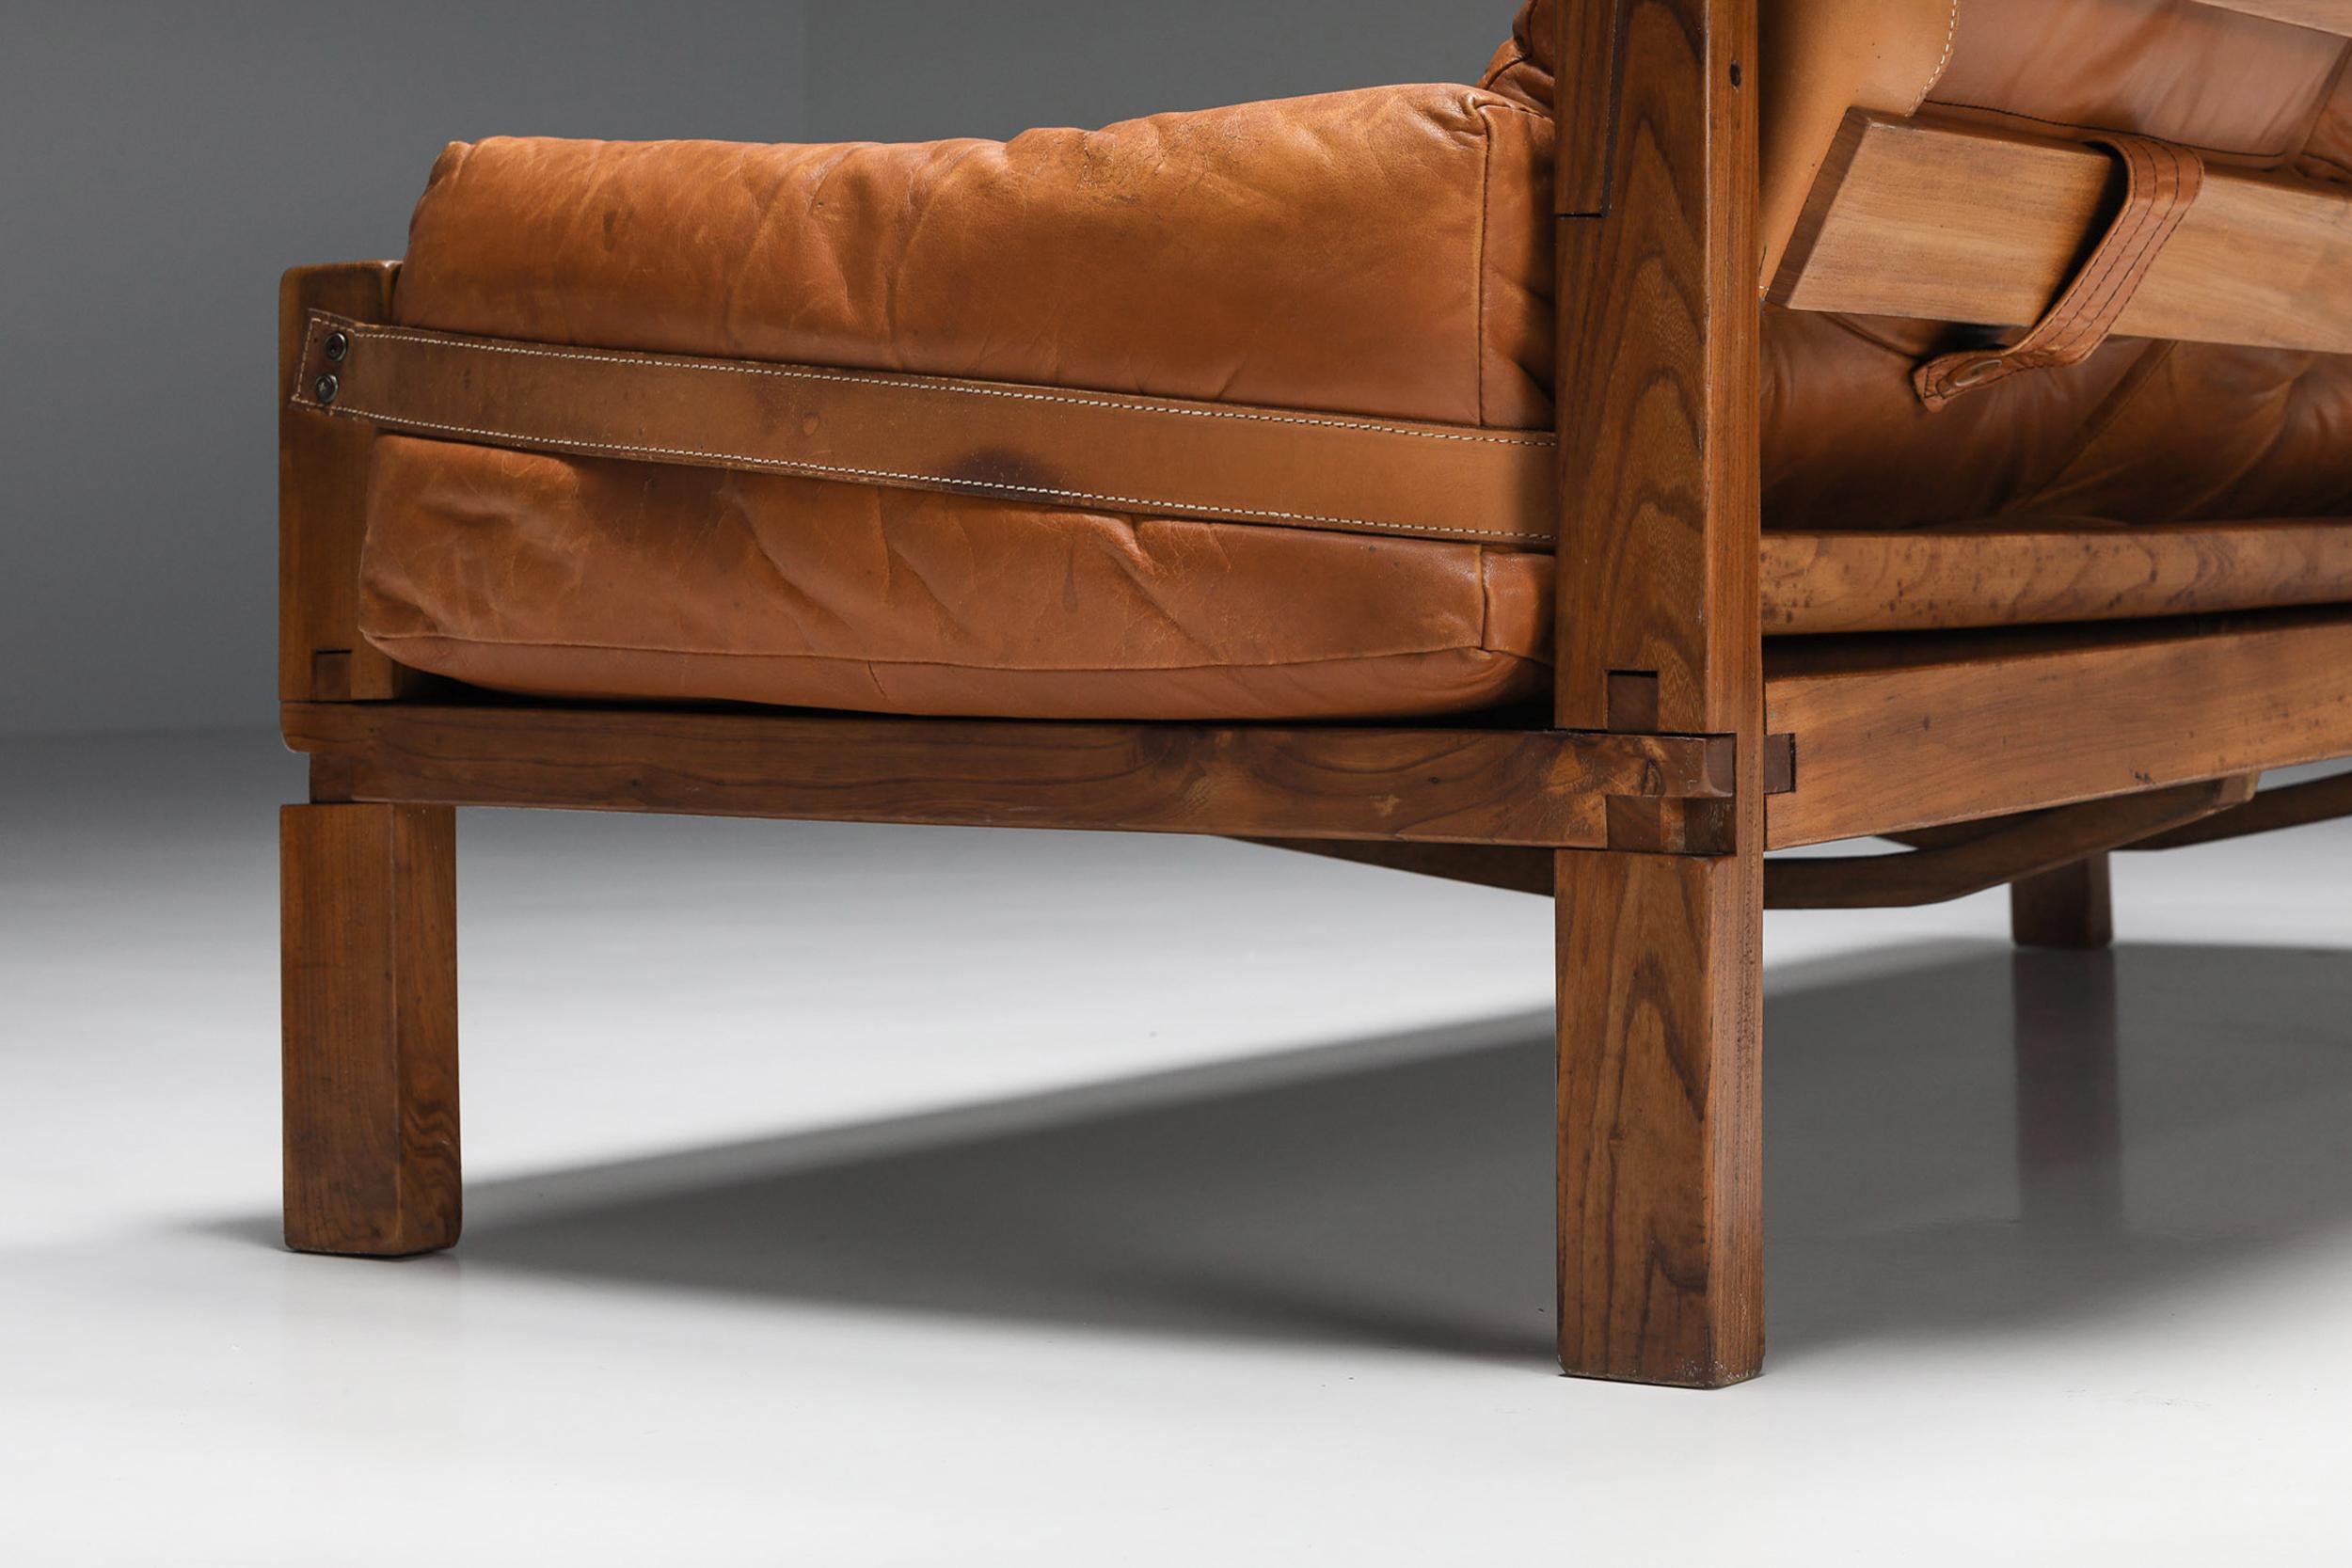 Pierre Chapo S32 Elm & Leather Sofa, inspired by Charlotte Perriand, French 3